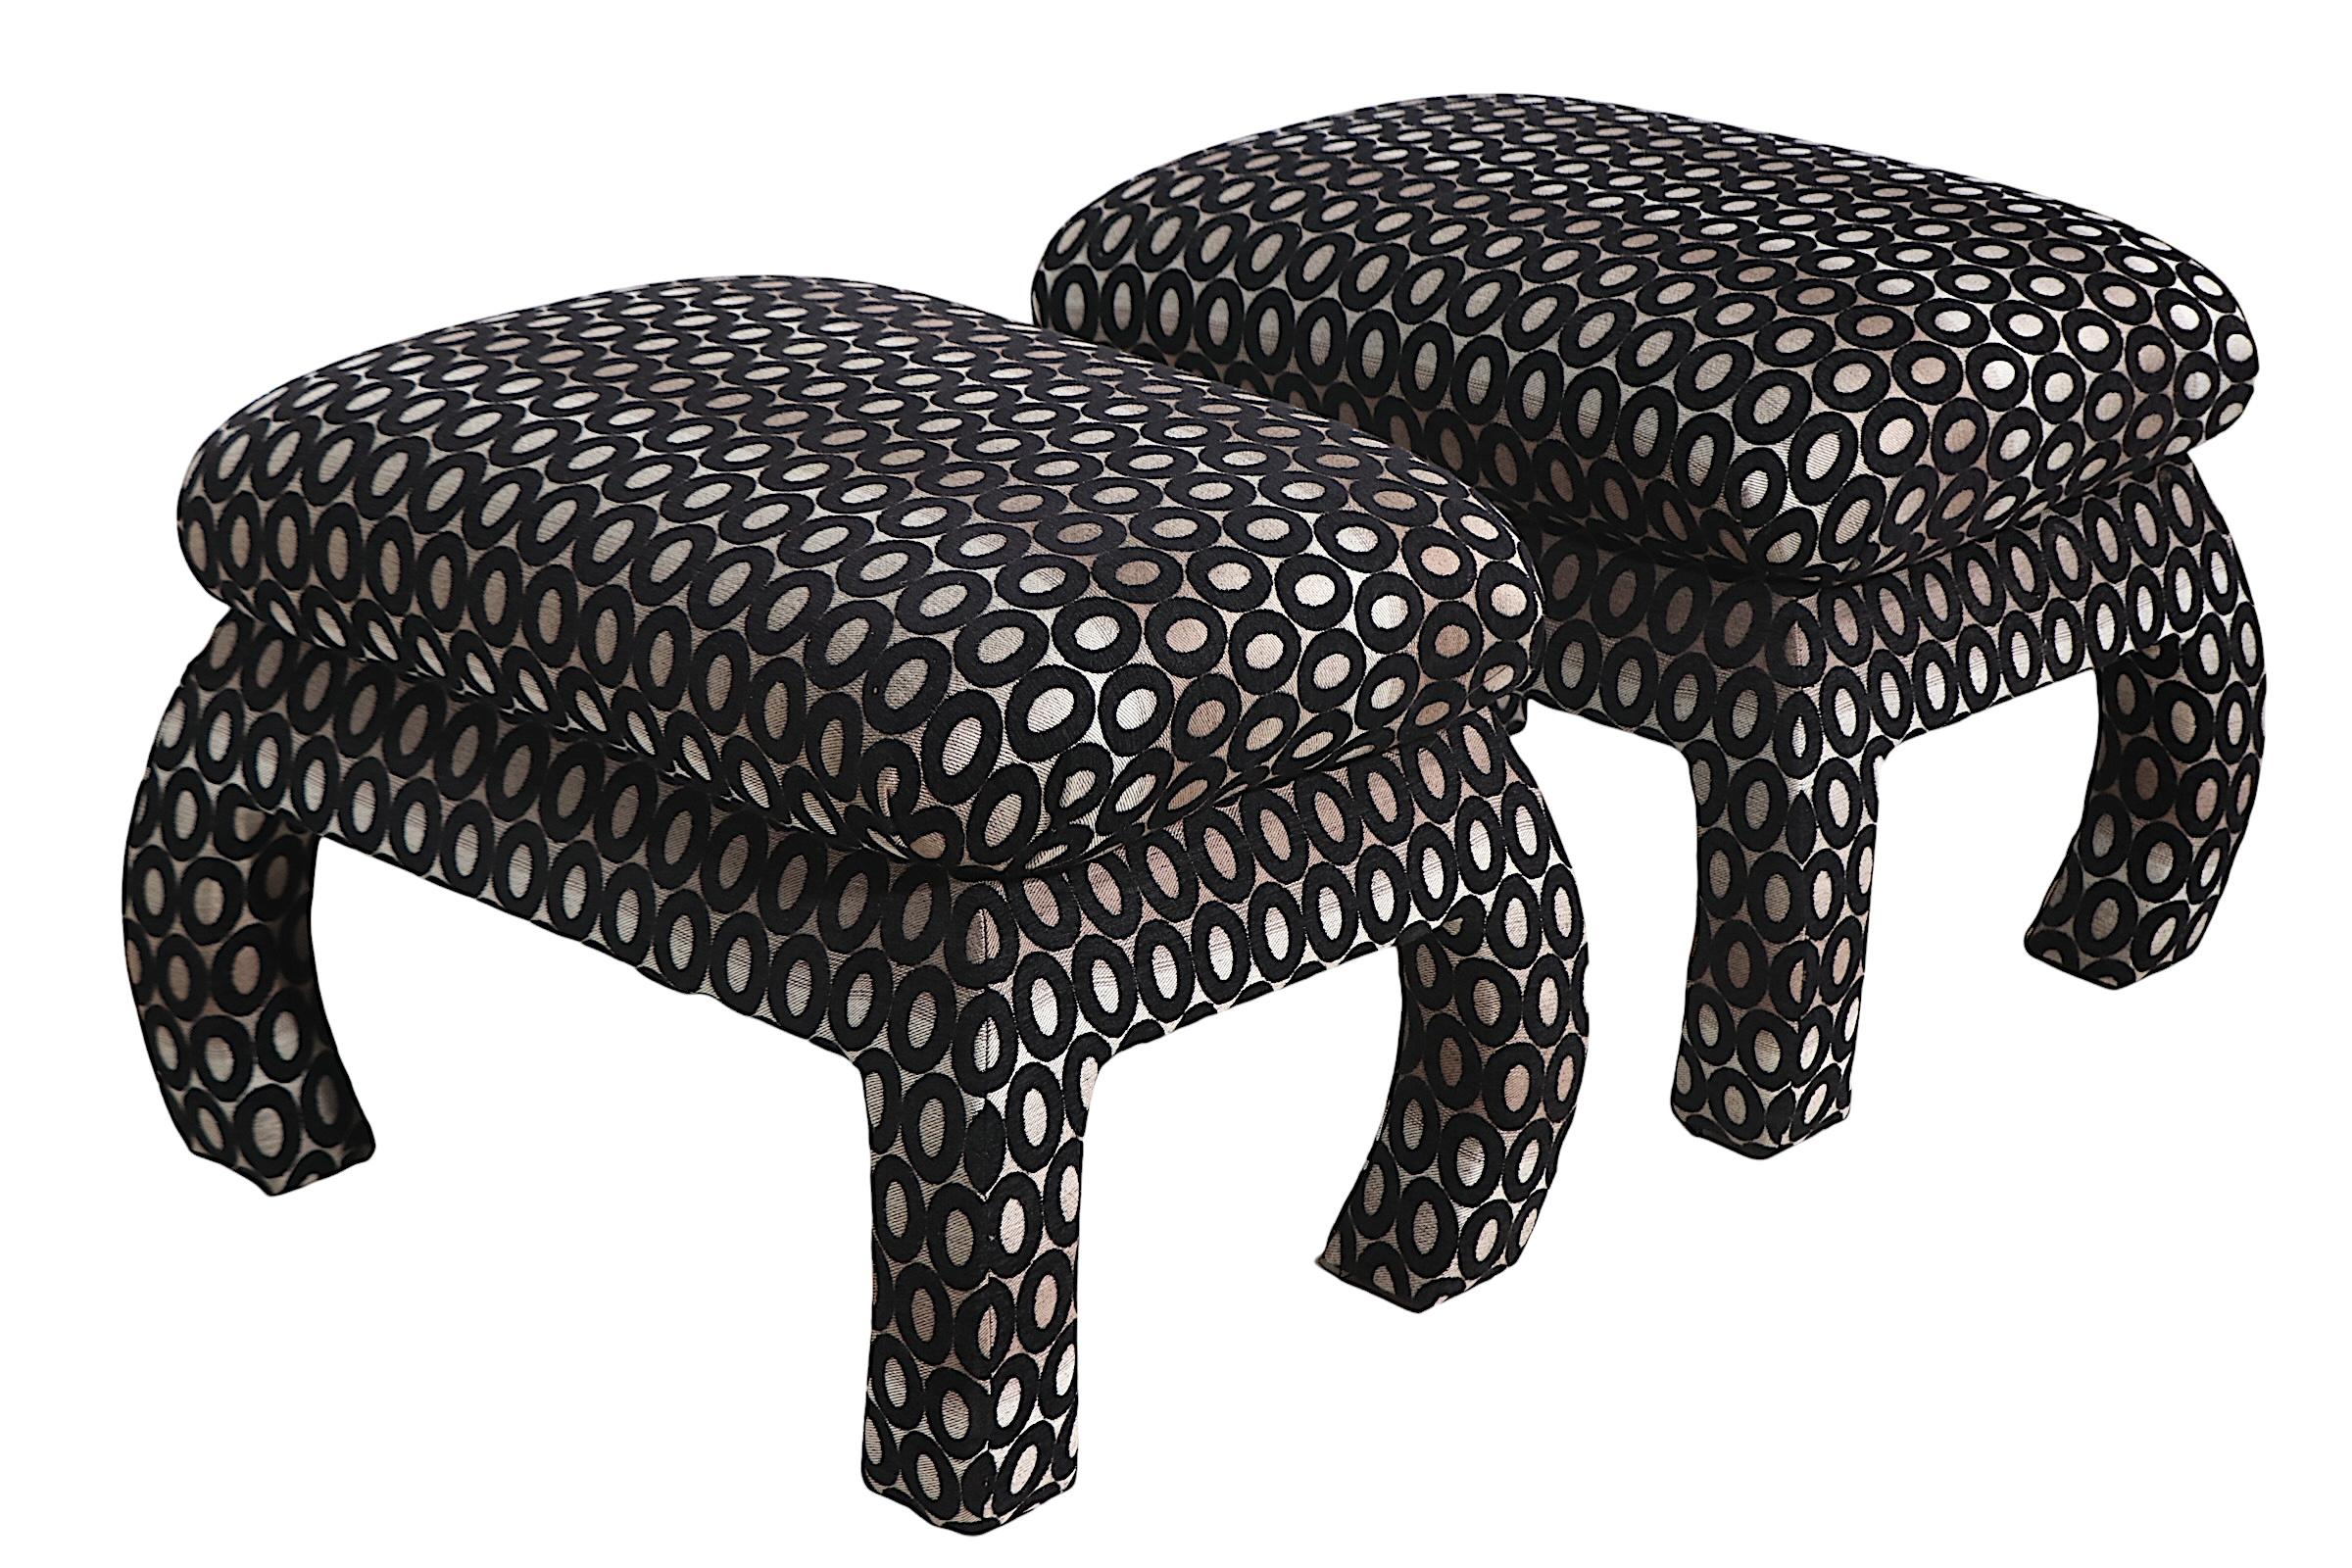 Mod Pr. of  Upholstered Stools Ottomans Benches c 1970/1980's  For Sale 1